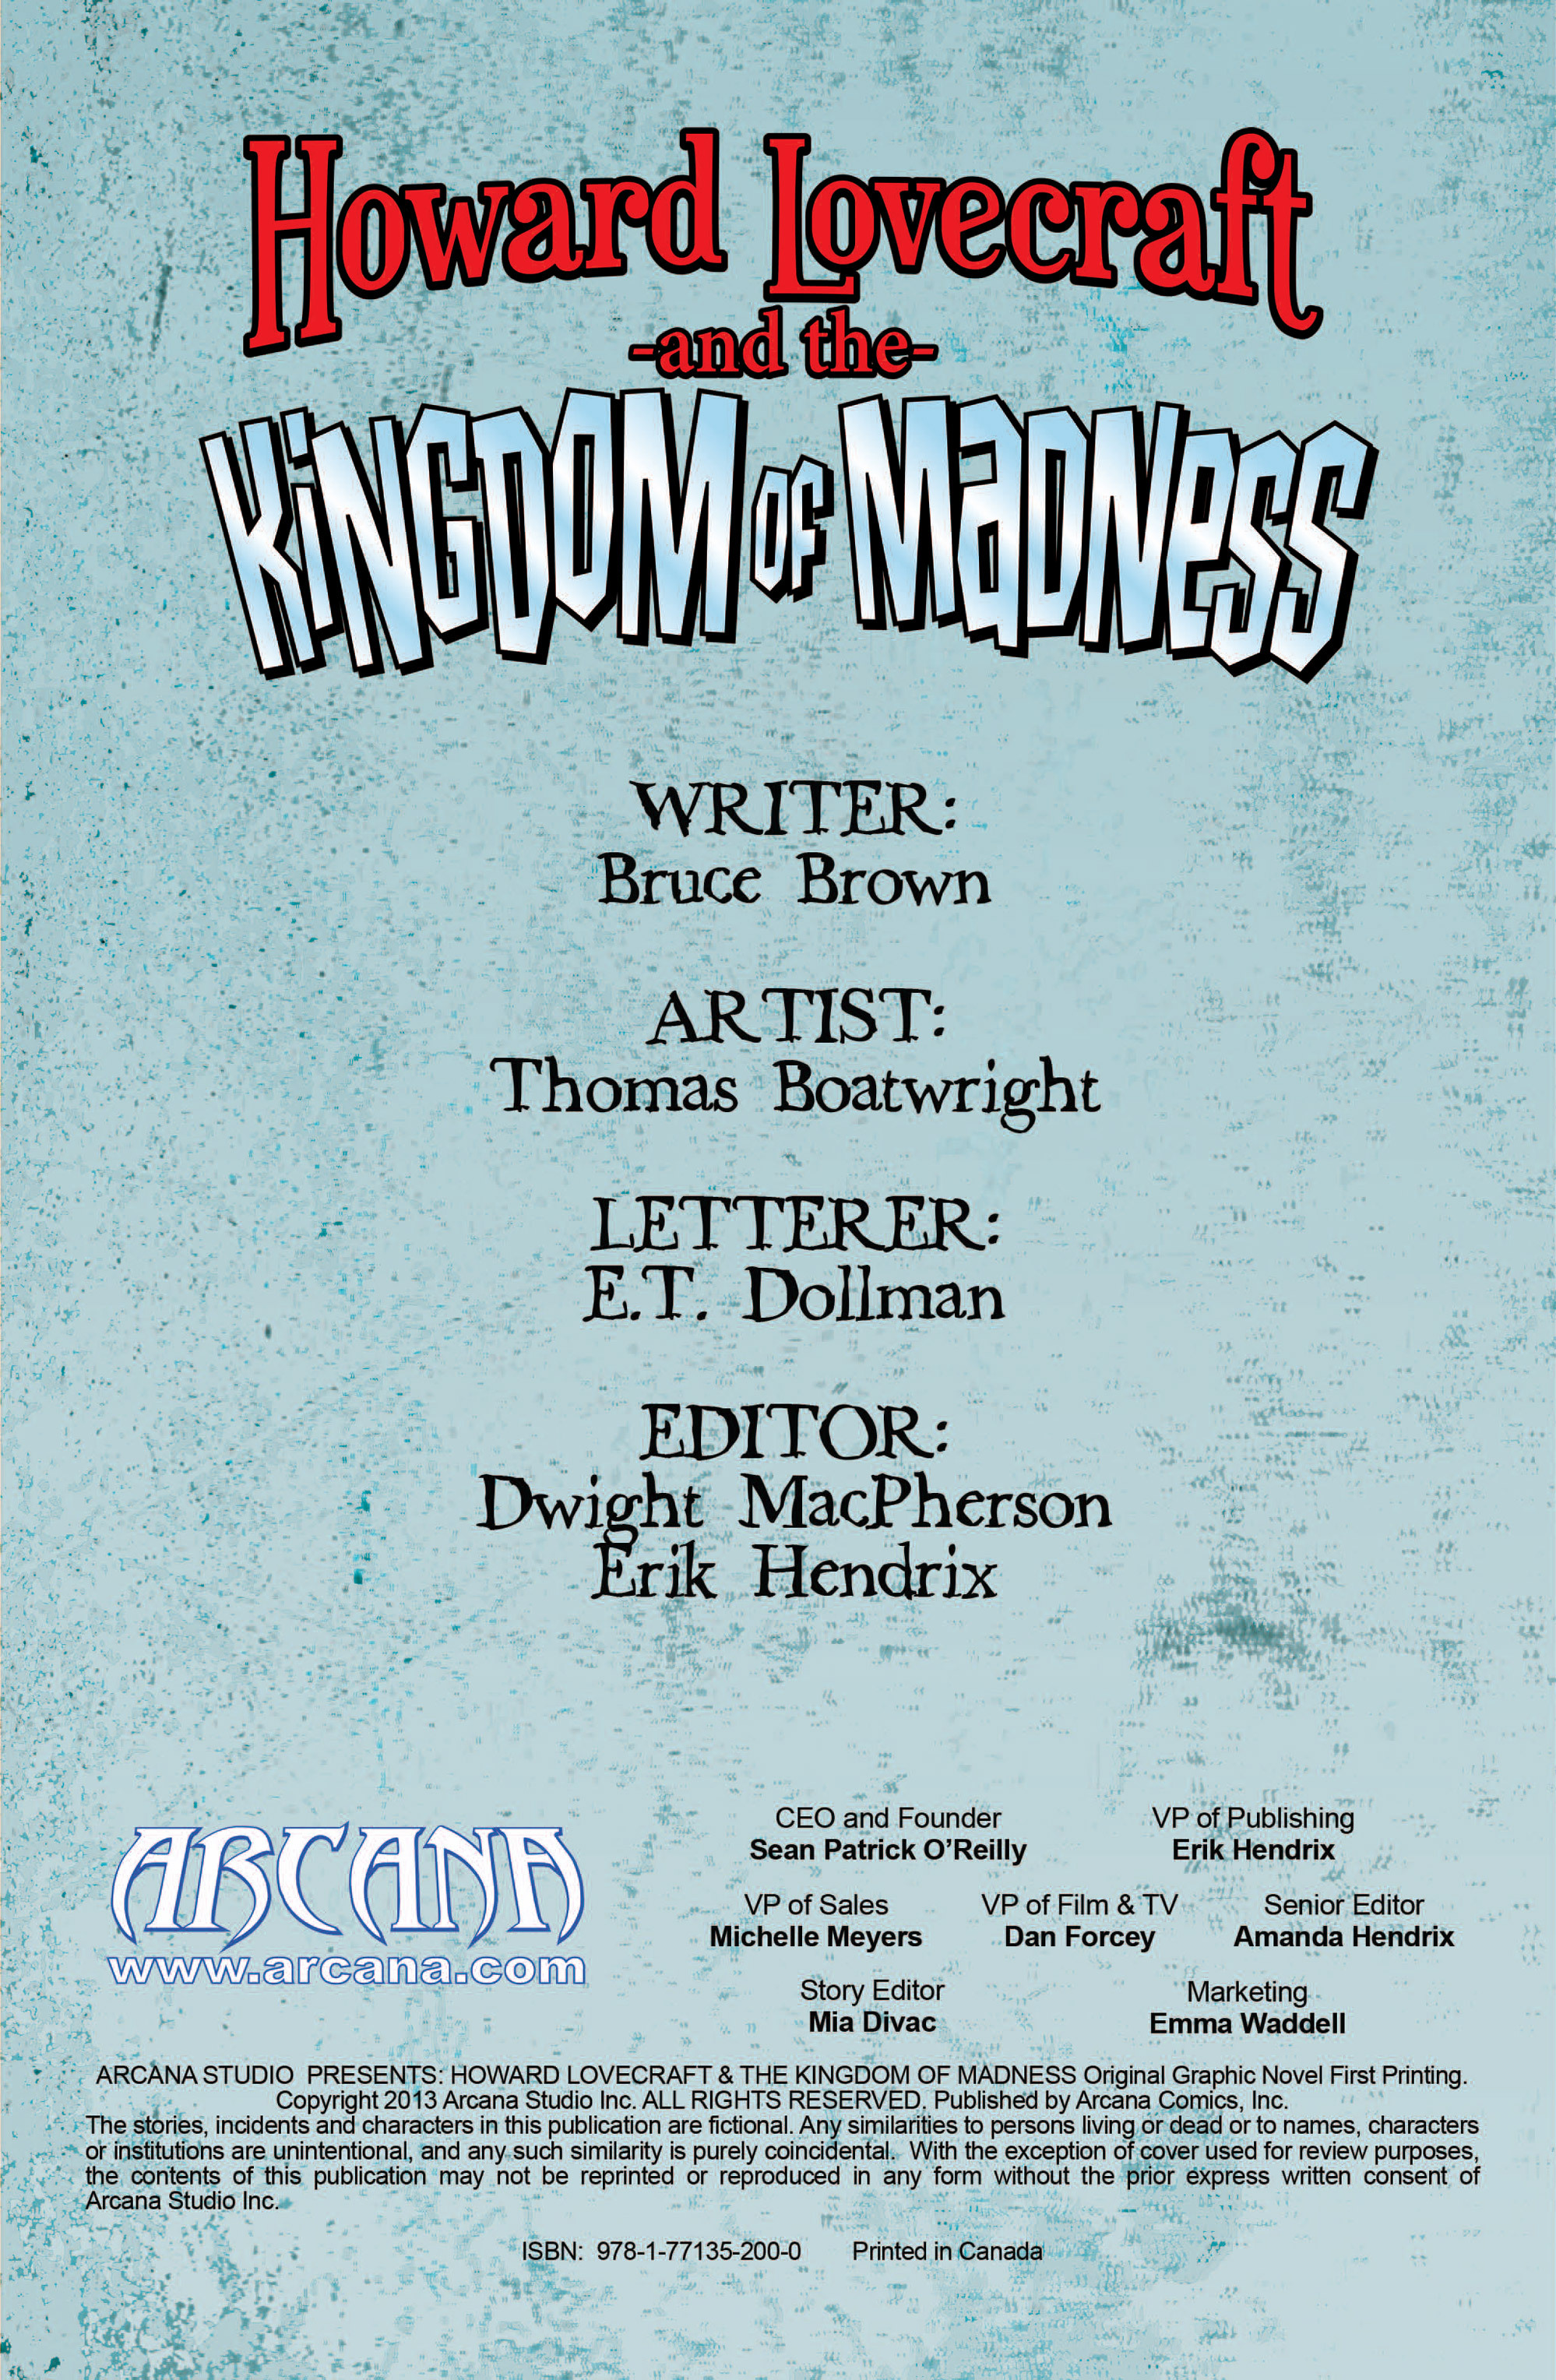 Read online Arcana Studio Presents: Howard Lovecraft & The Kingdom of Madness comic -  Issue #Arcana Studio Presents: Howard Lovecraft & The Kingdom of Madness Full - 2